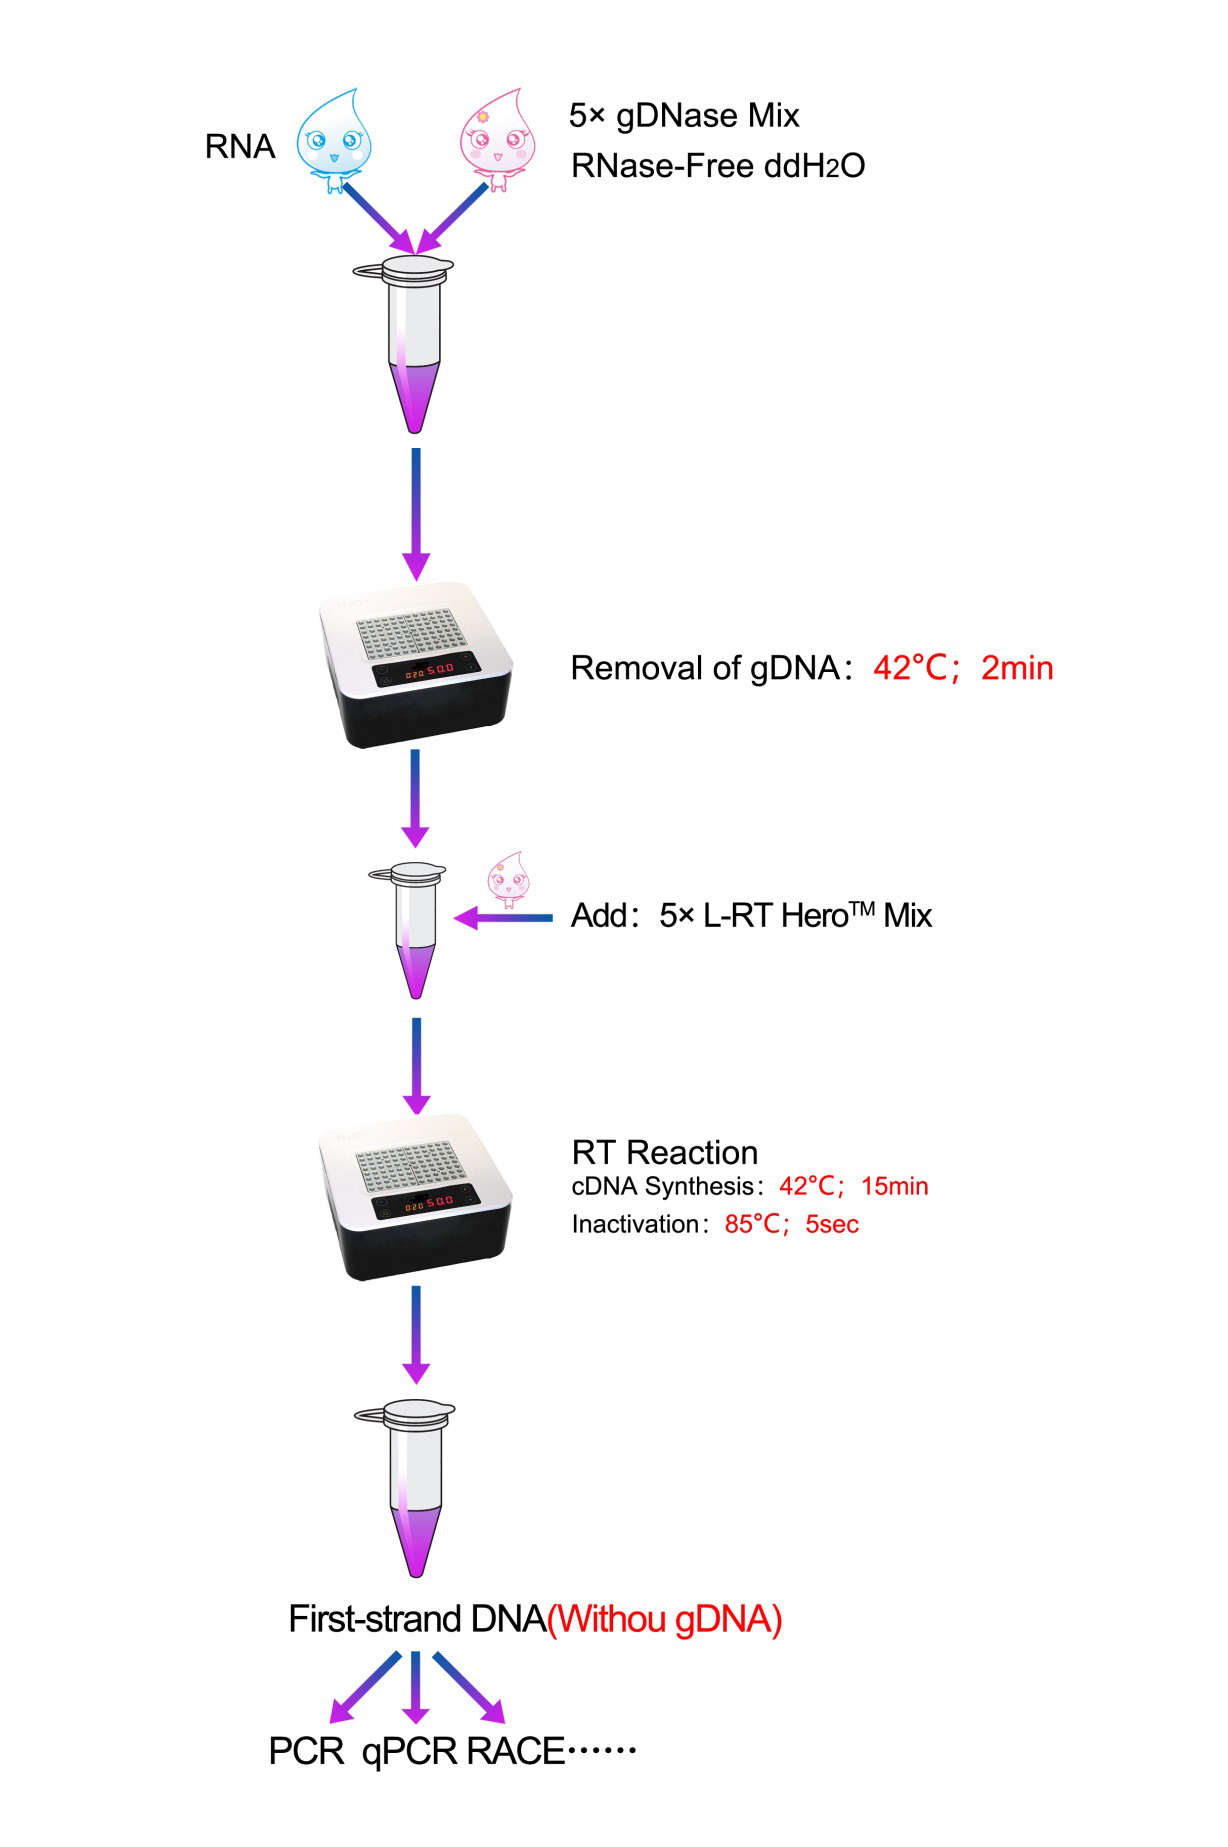 Lnc-RT HeroTM I(With gDNase)(Super Premix for first-strand cDNA synthesis from lncRNA)